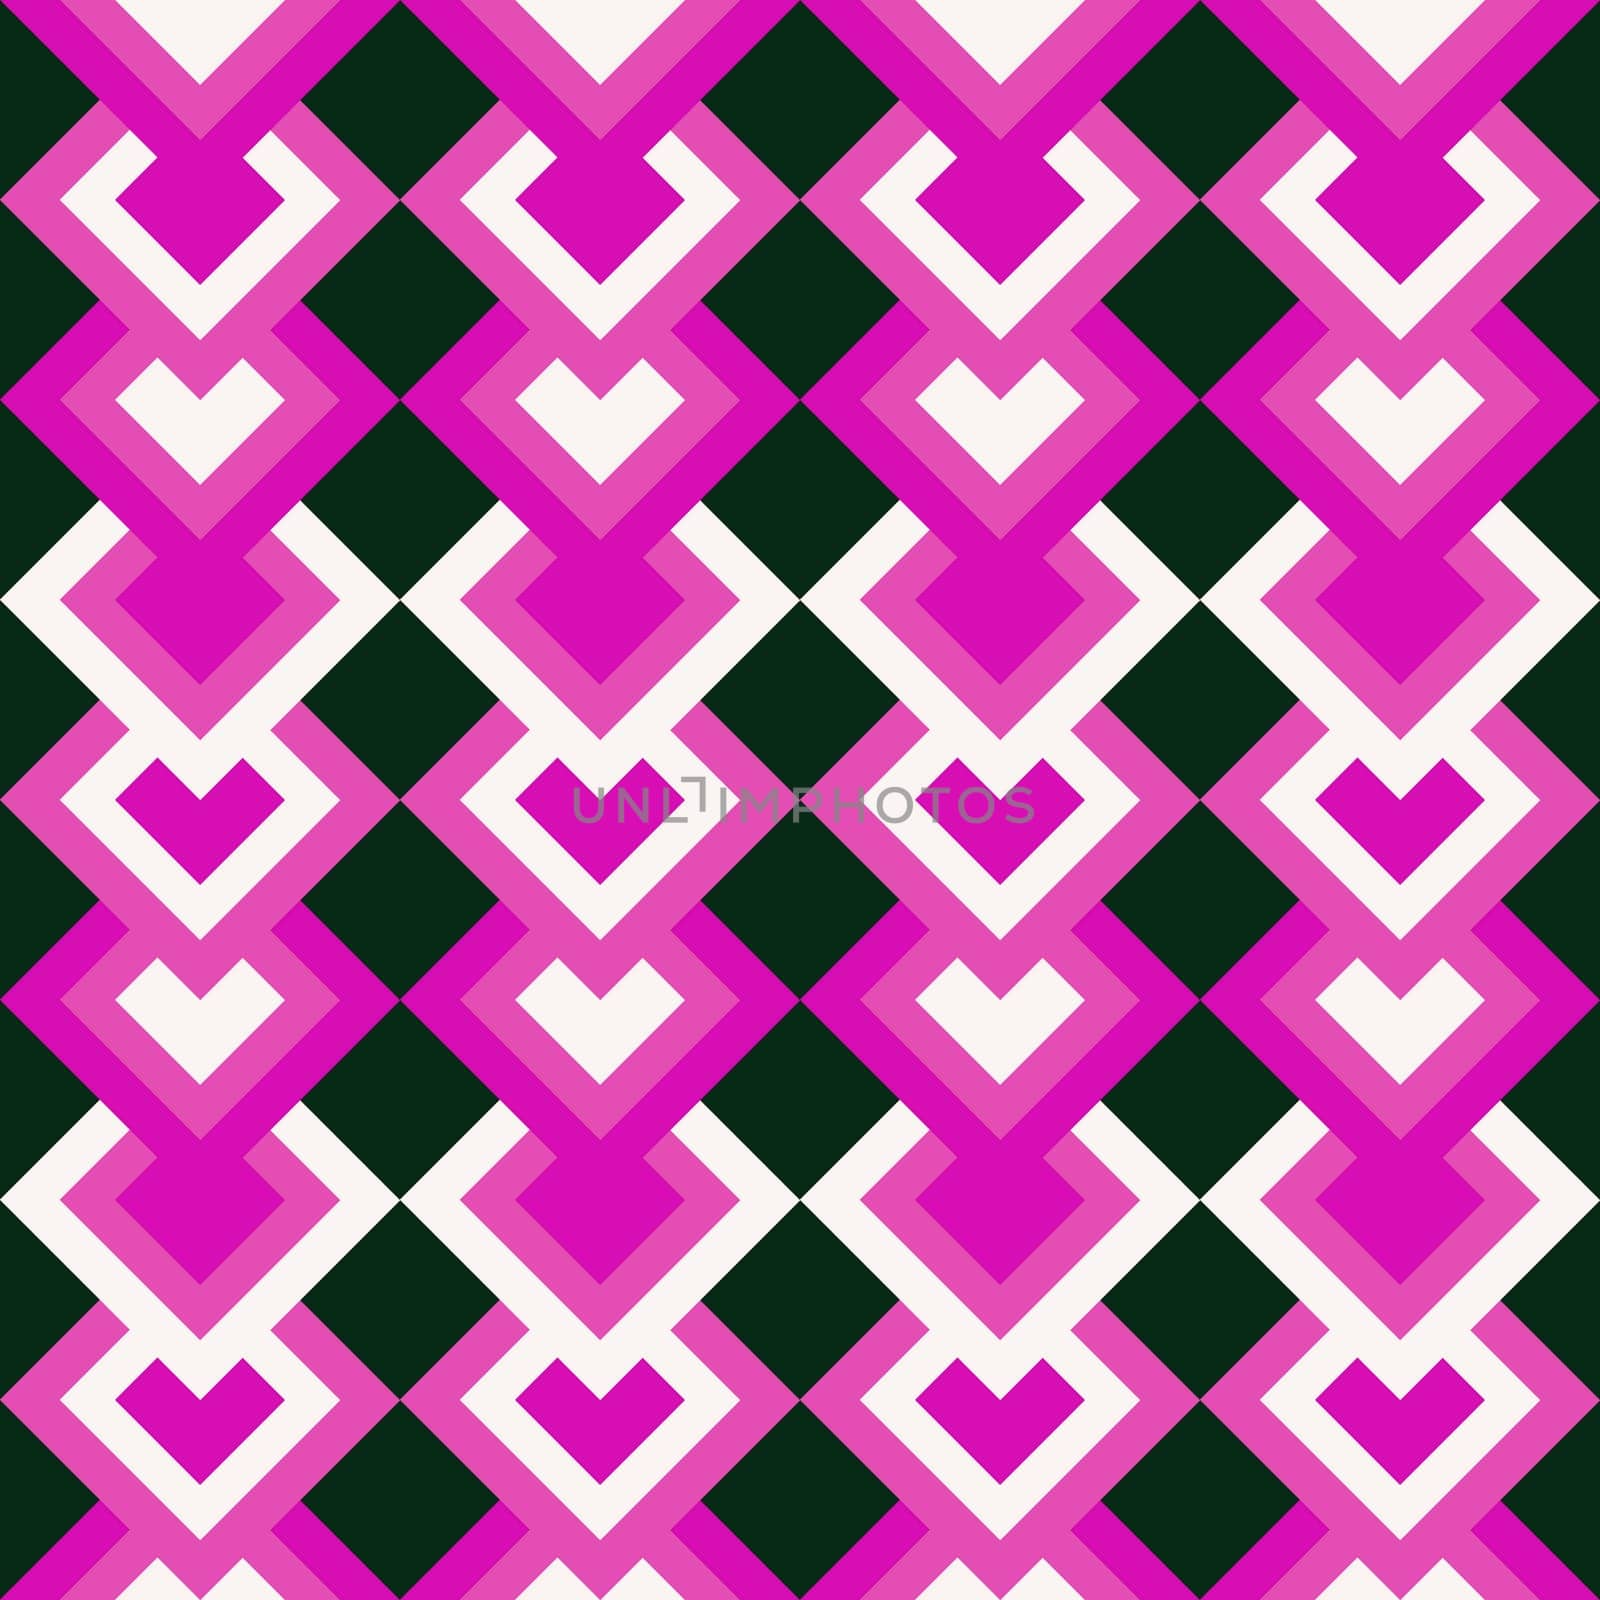 Vintage aestethic pattern with triangles in the style of the 70s and 60 by Dustick